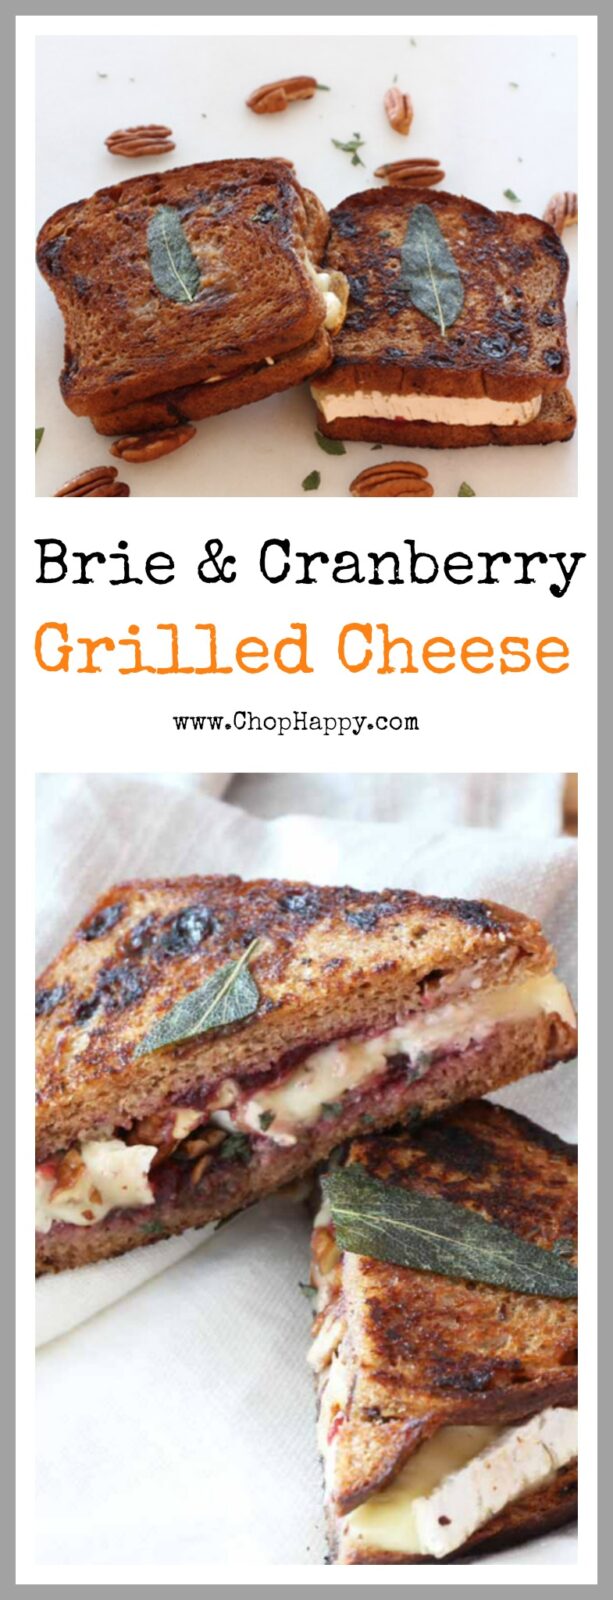 Brie and Cranberry Grilled Cheese Recipe- is so easy and creamy sweet, cheesy, and delish. Tastes like the baked brie appetizer between two pieces of cinnamon raisin bread. www.ChopHappy.com